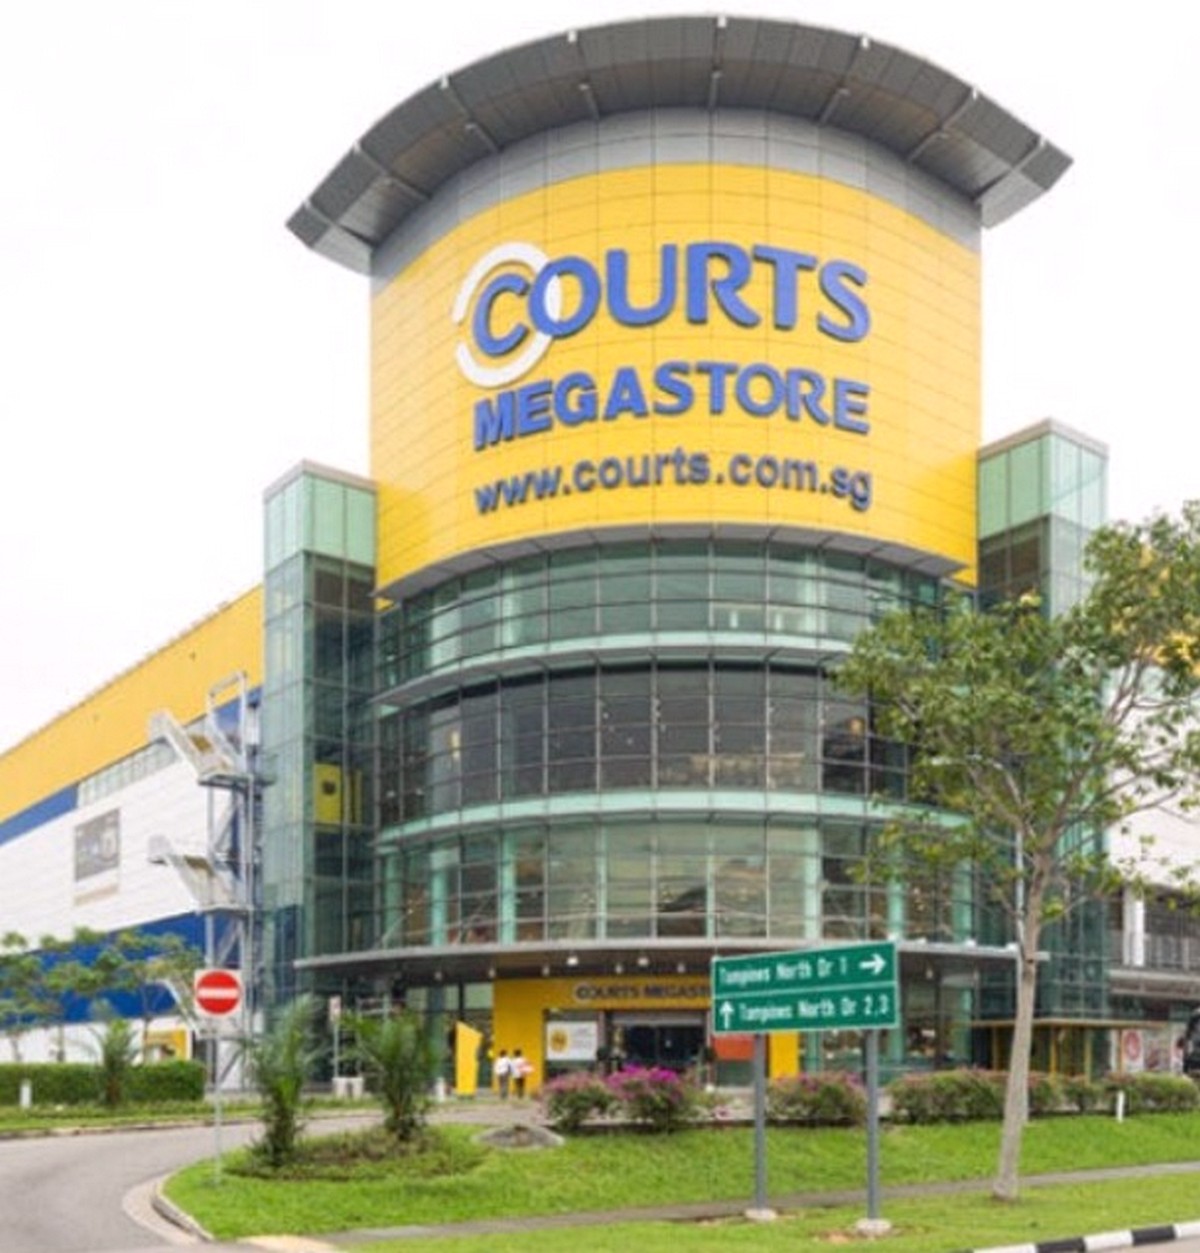 Courts-Warehouse-Sale-Singapore-Clearance-Discounts-2021 13-17 May 2021: COURTS Massive Furniture & TV Clearance Sale! Up to 65% OFF & Buy 1 Free 1 Deals!